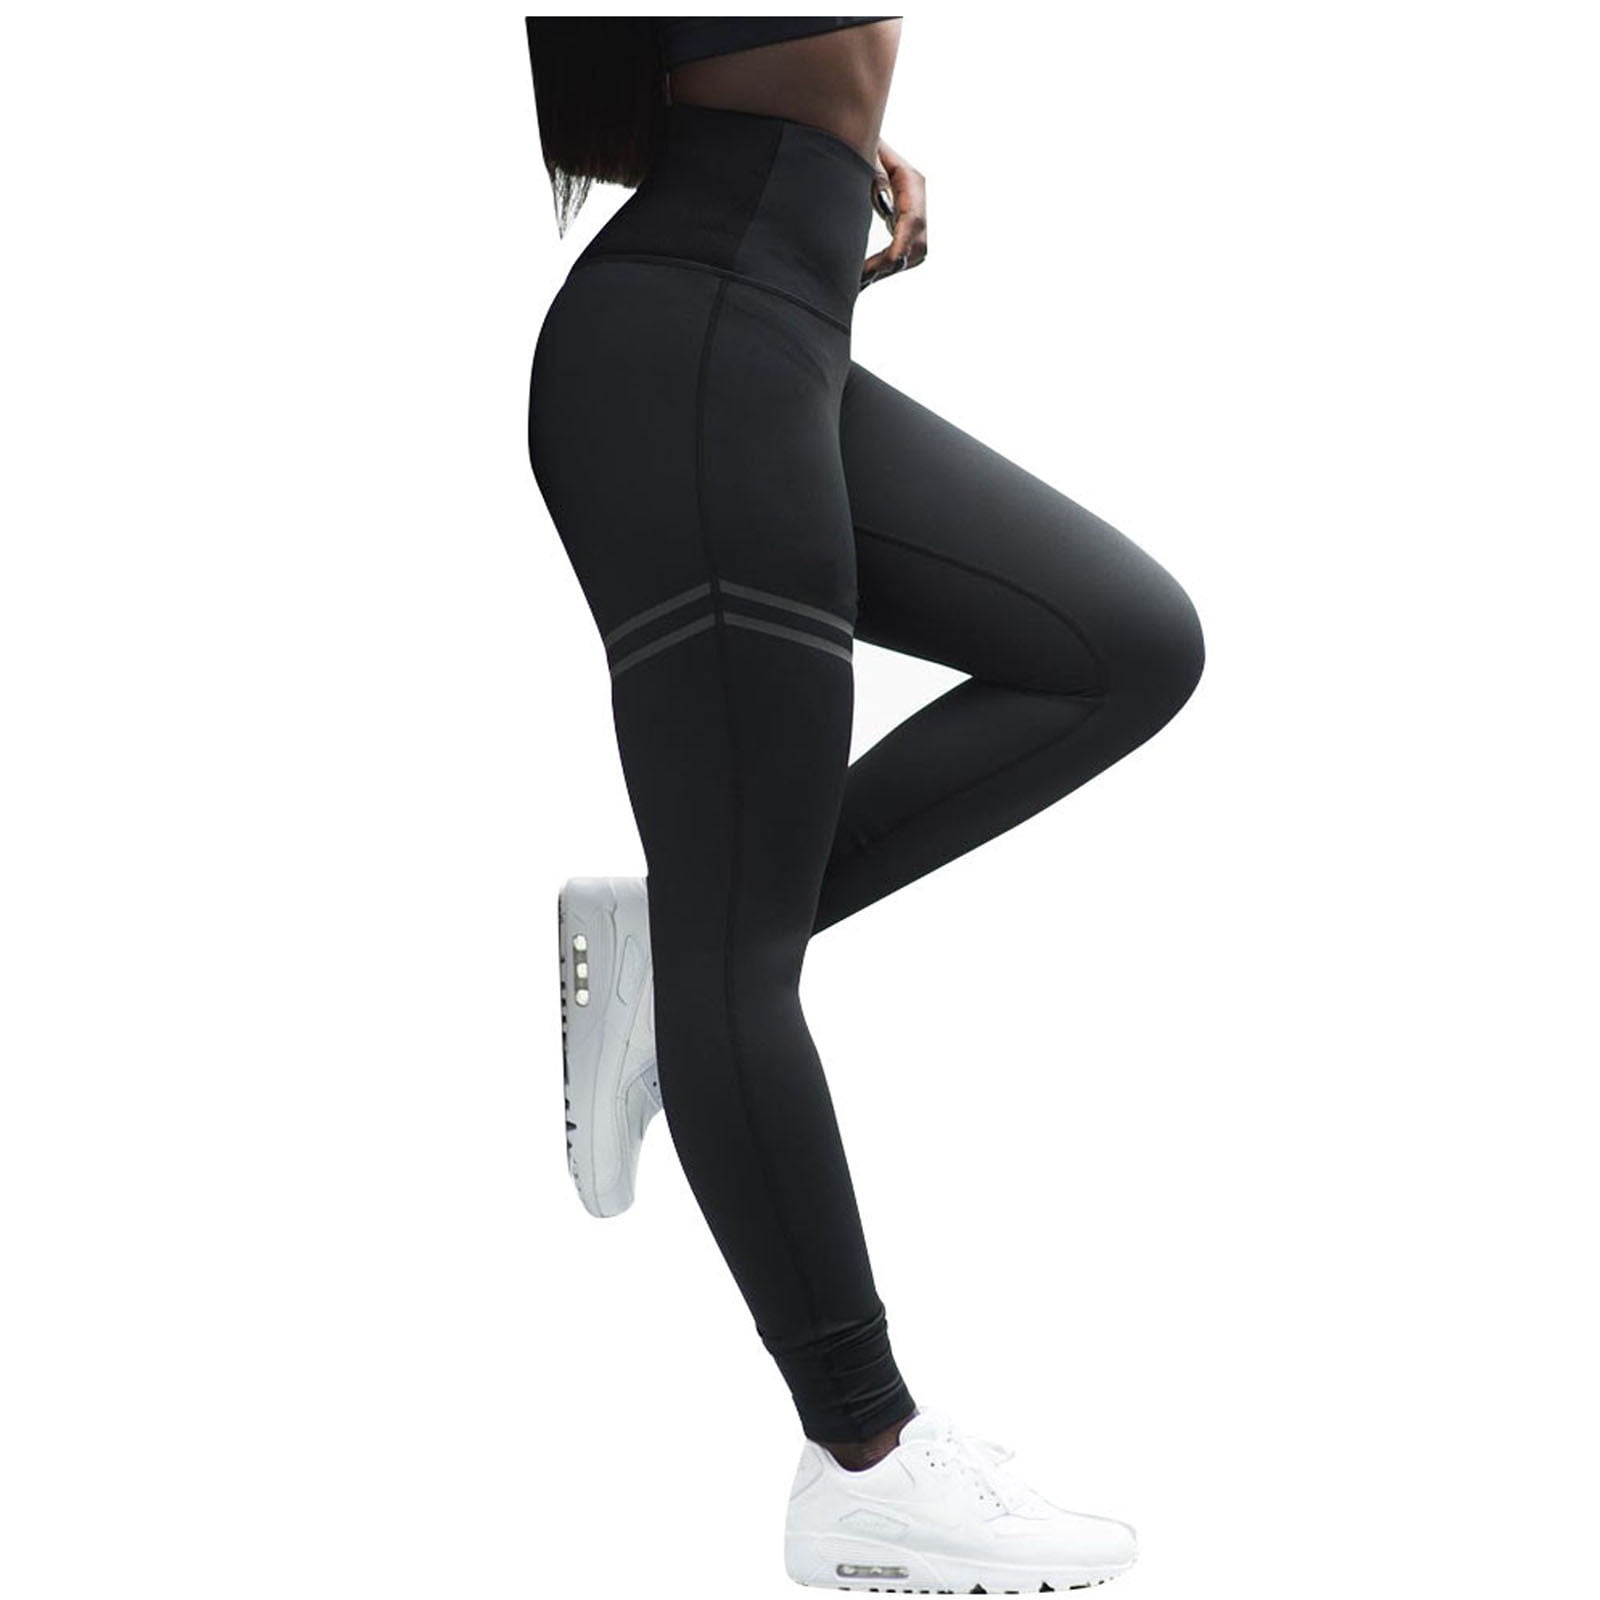 Stretched Shiny Sports Leggings Insulated Leggings for Women Full Length  Yoga Pants No Front Seam Stretch Tights